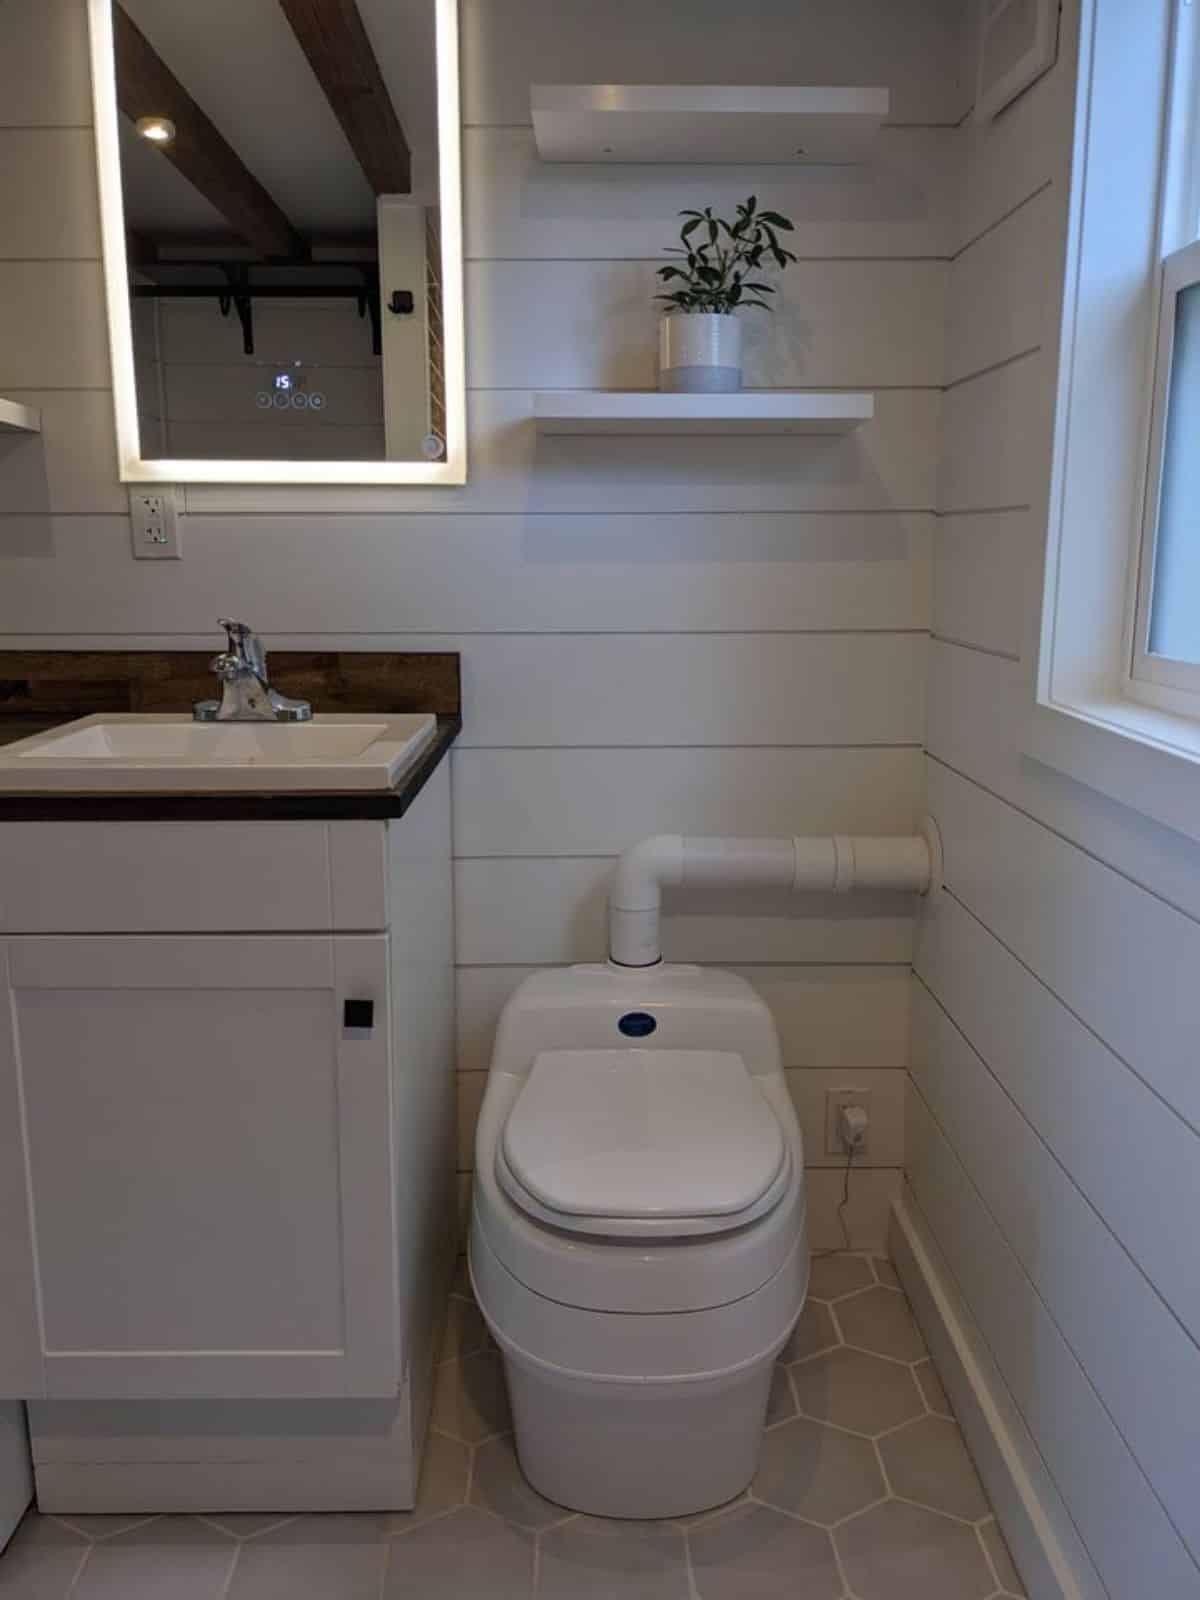 composting toilet in bathroom of 24’ tiny house in Canada